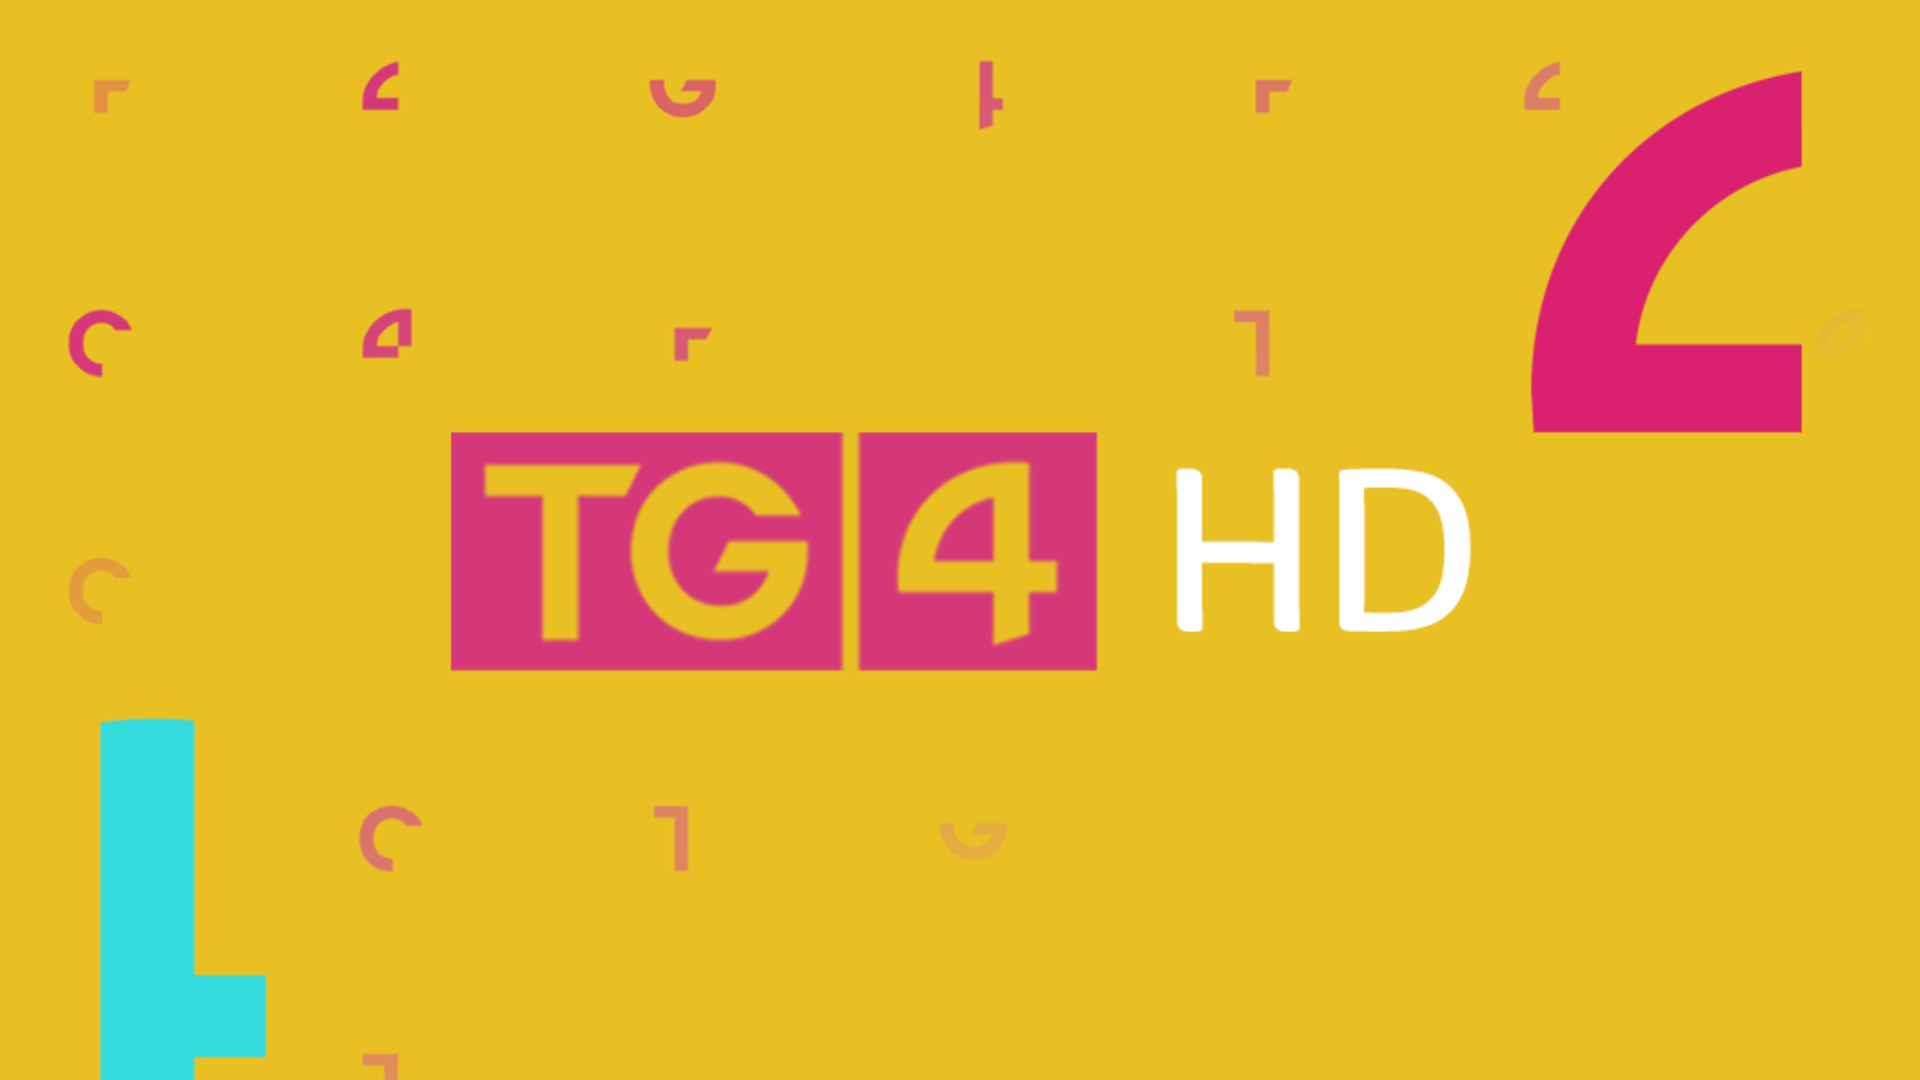 TG4 | TG4 HD available for Saorview customers in Ireland | 2022 | Press  Releases | Press | Irish Television Channel